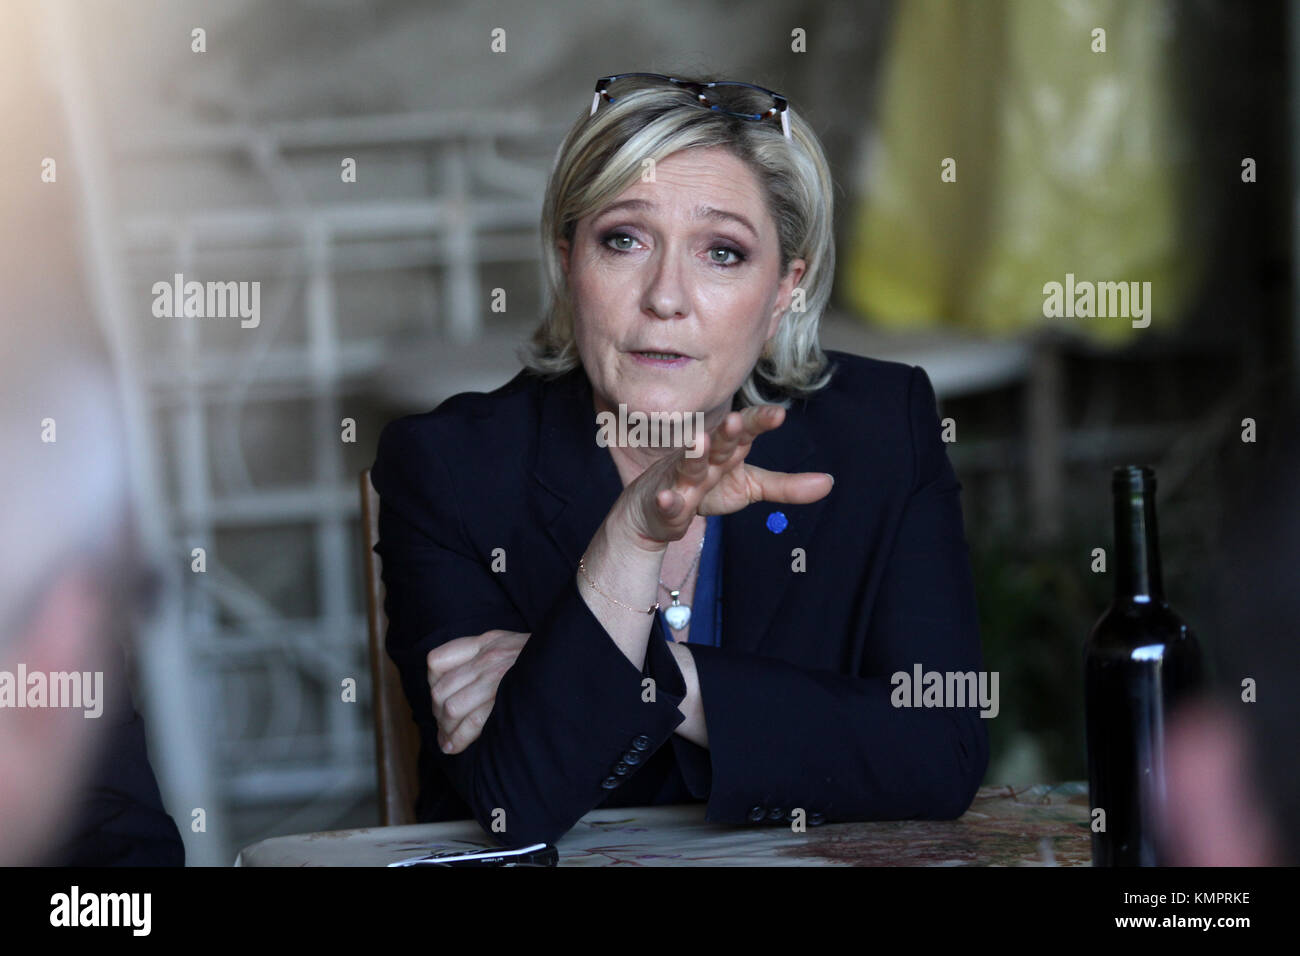 Loubersan (France) March, 09 2017 ; Marine LE PEN Candidate of the far-right Front National for french presidential election of 2017 visiting on a far Stock Photo